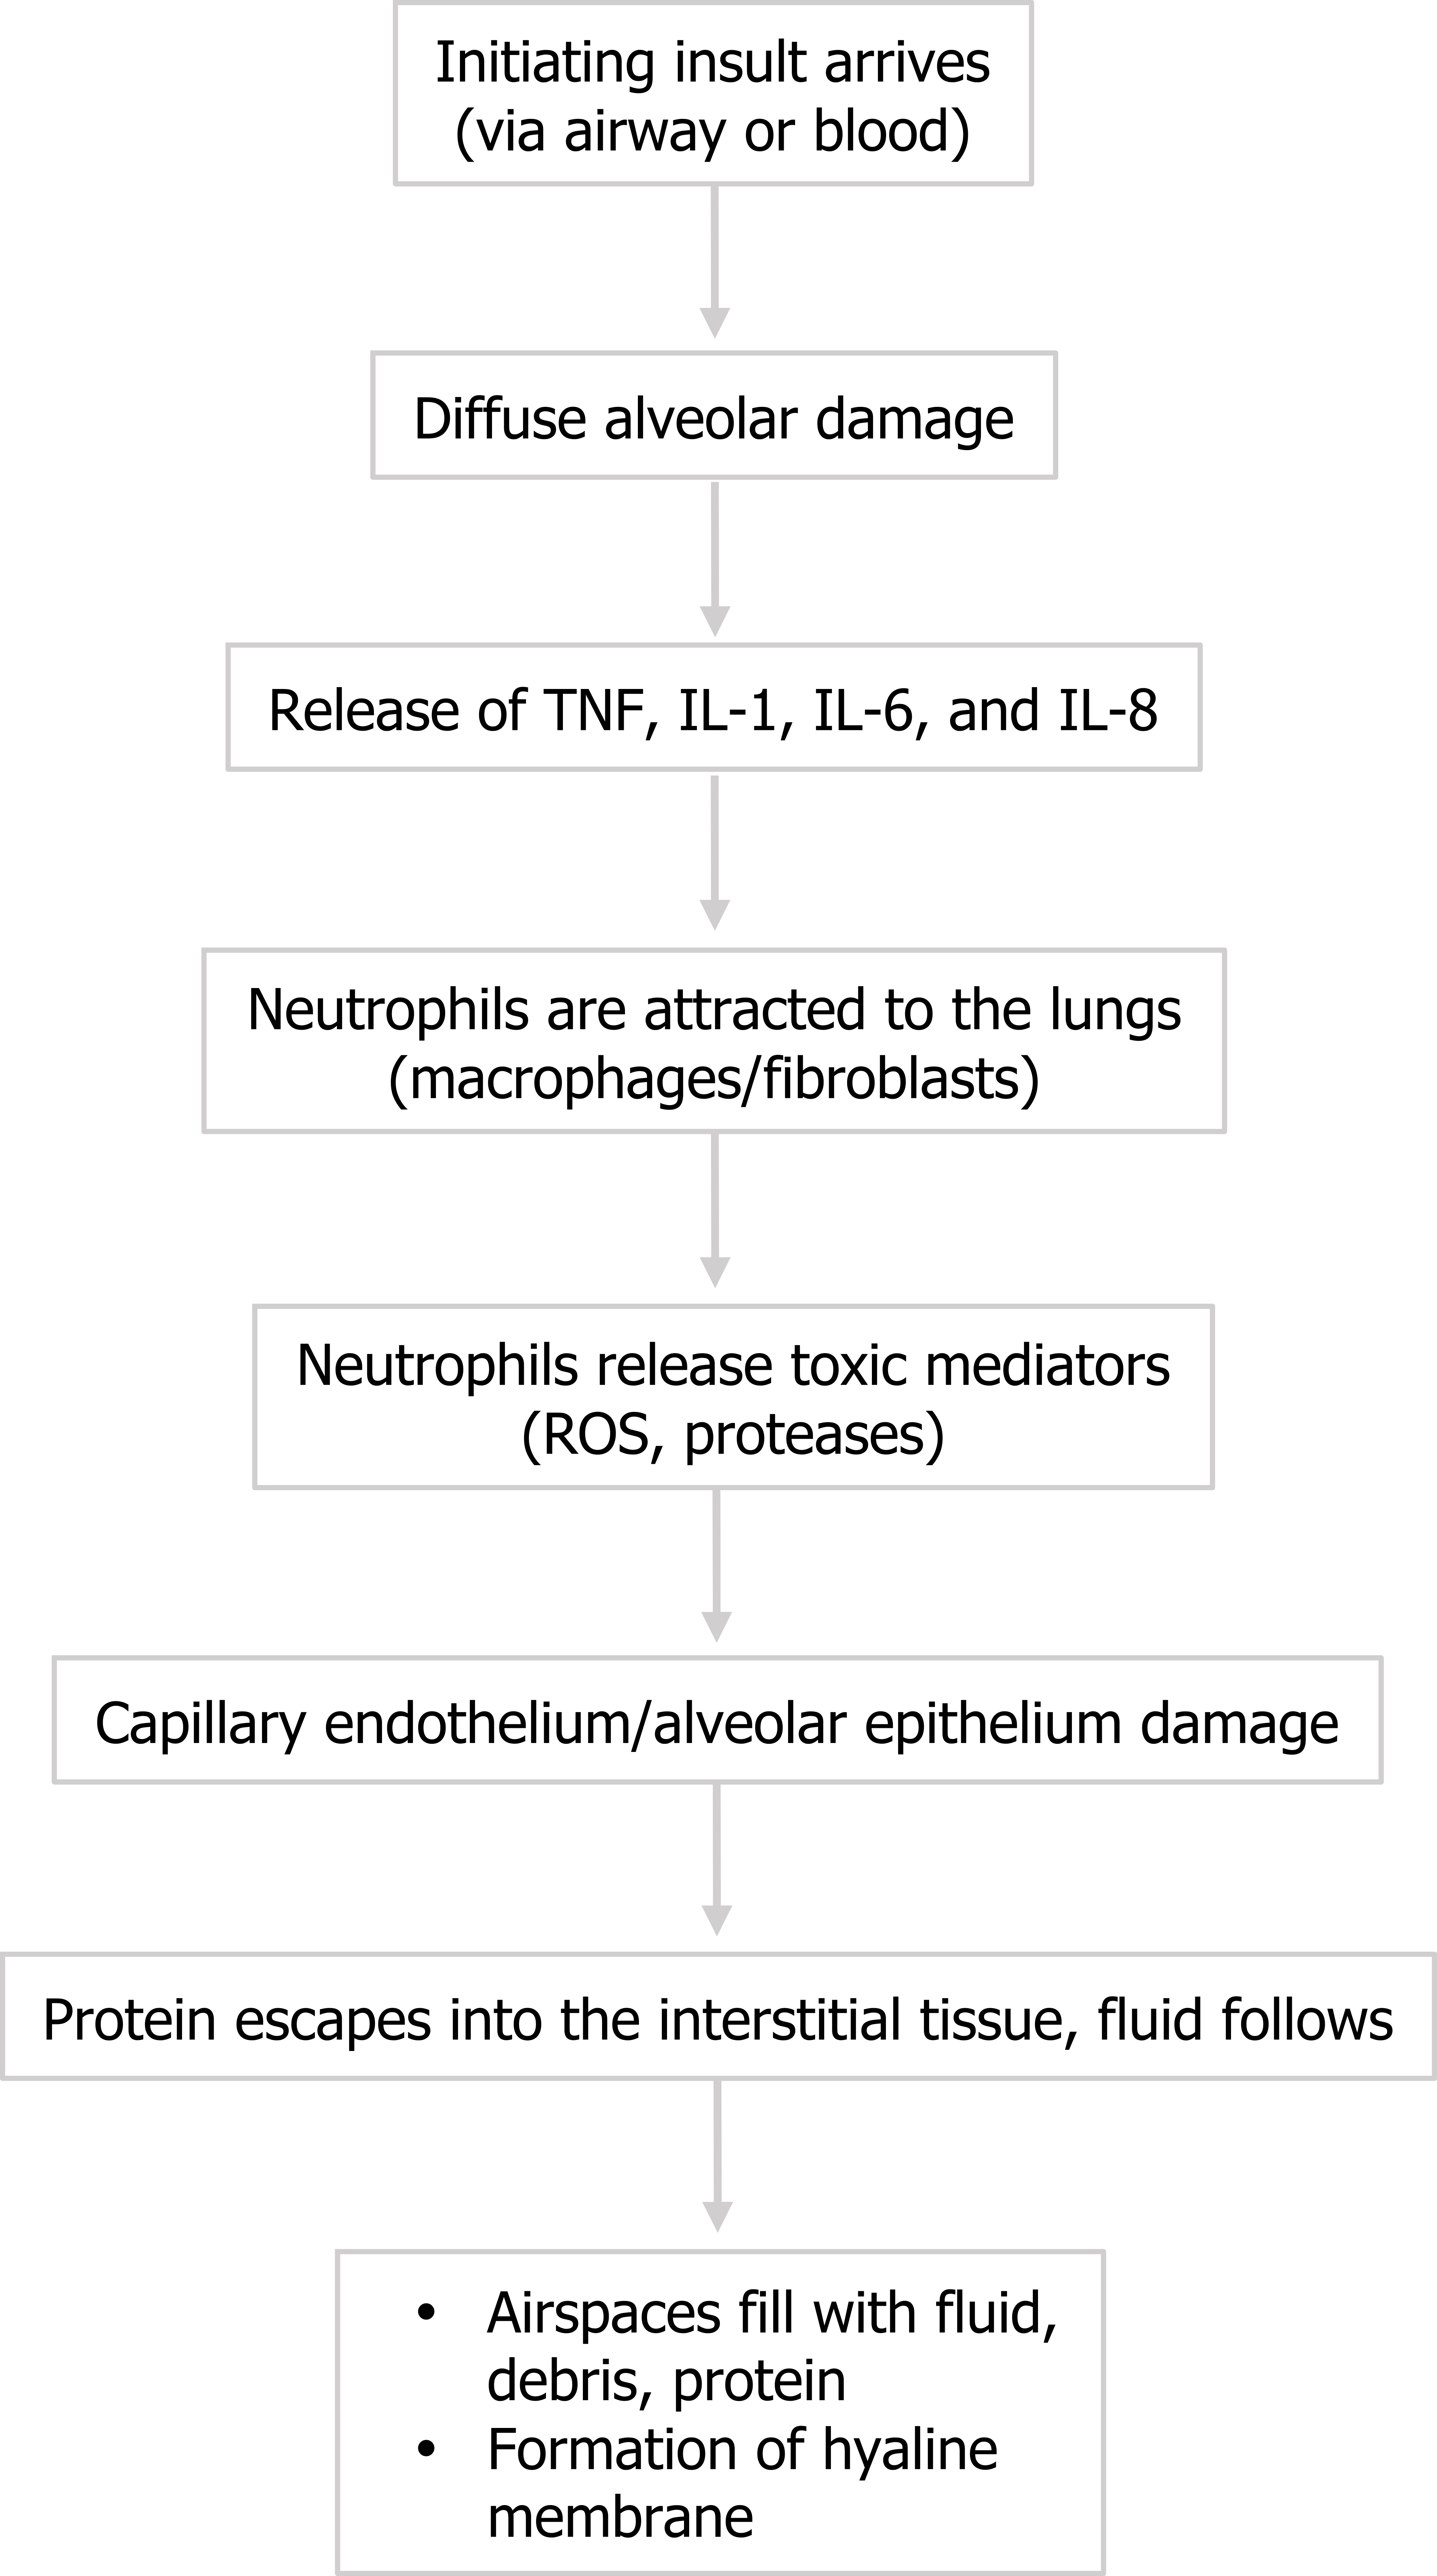 Initiating insult arrives (via airway or blood) arrow to diffuse alveolar damage arrow to release of TNF, IL-1, IL-6 and IL-8 arrow to neutrophils attracted to the lungs (macrophages/fibroblasts) arrow to neutrophils release toxic mediators (ROS, proteases) arrow to capillary endothelium/alveolar epithelium damage arrow to protein escapes into the interstitial tissue, fluid follows arrow to airspaces fill with fluid, debris, protein and formation of hyaline membrane.